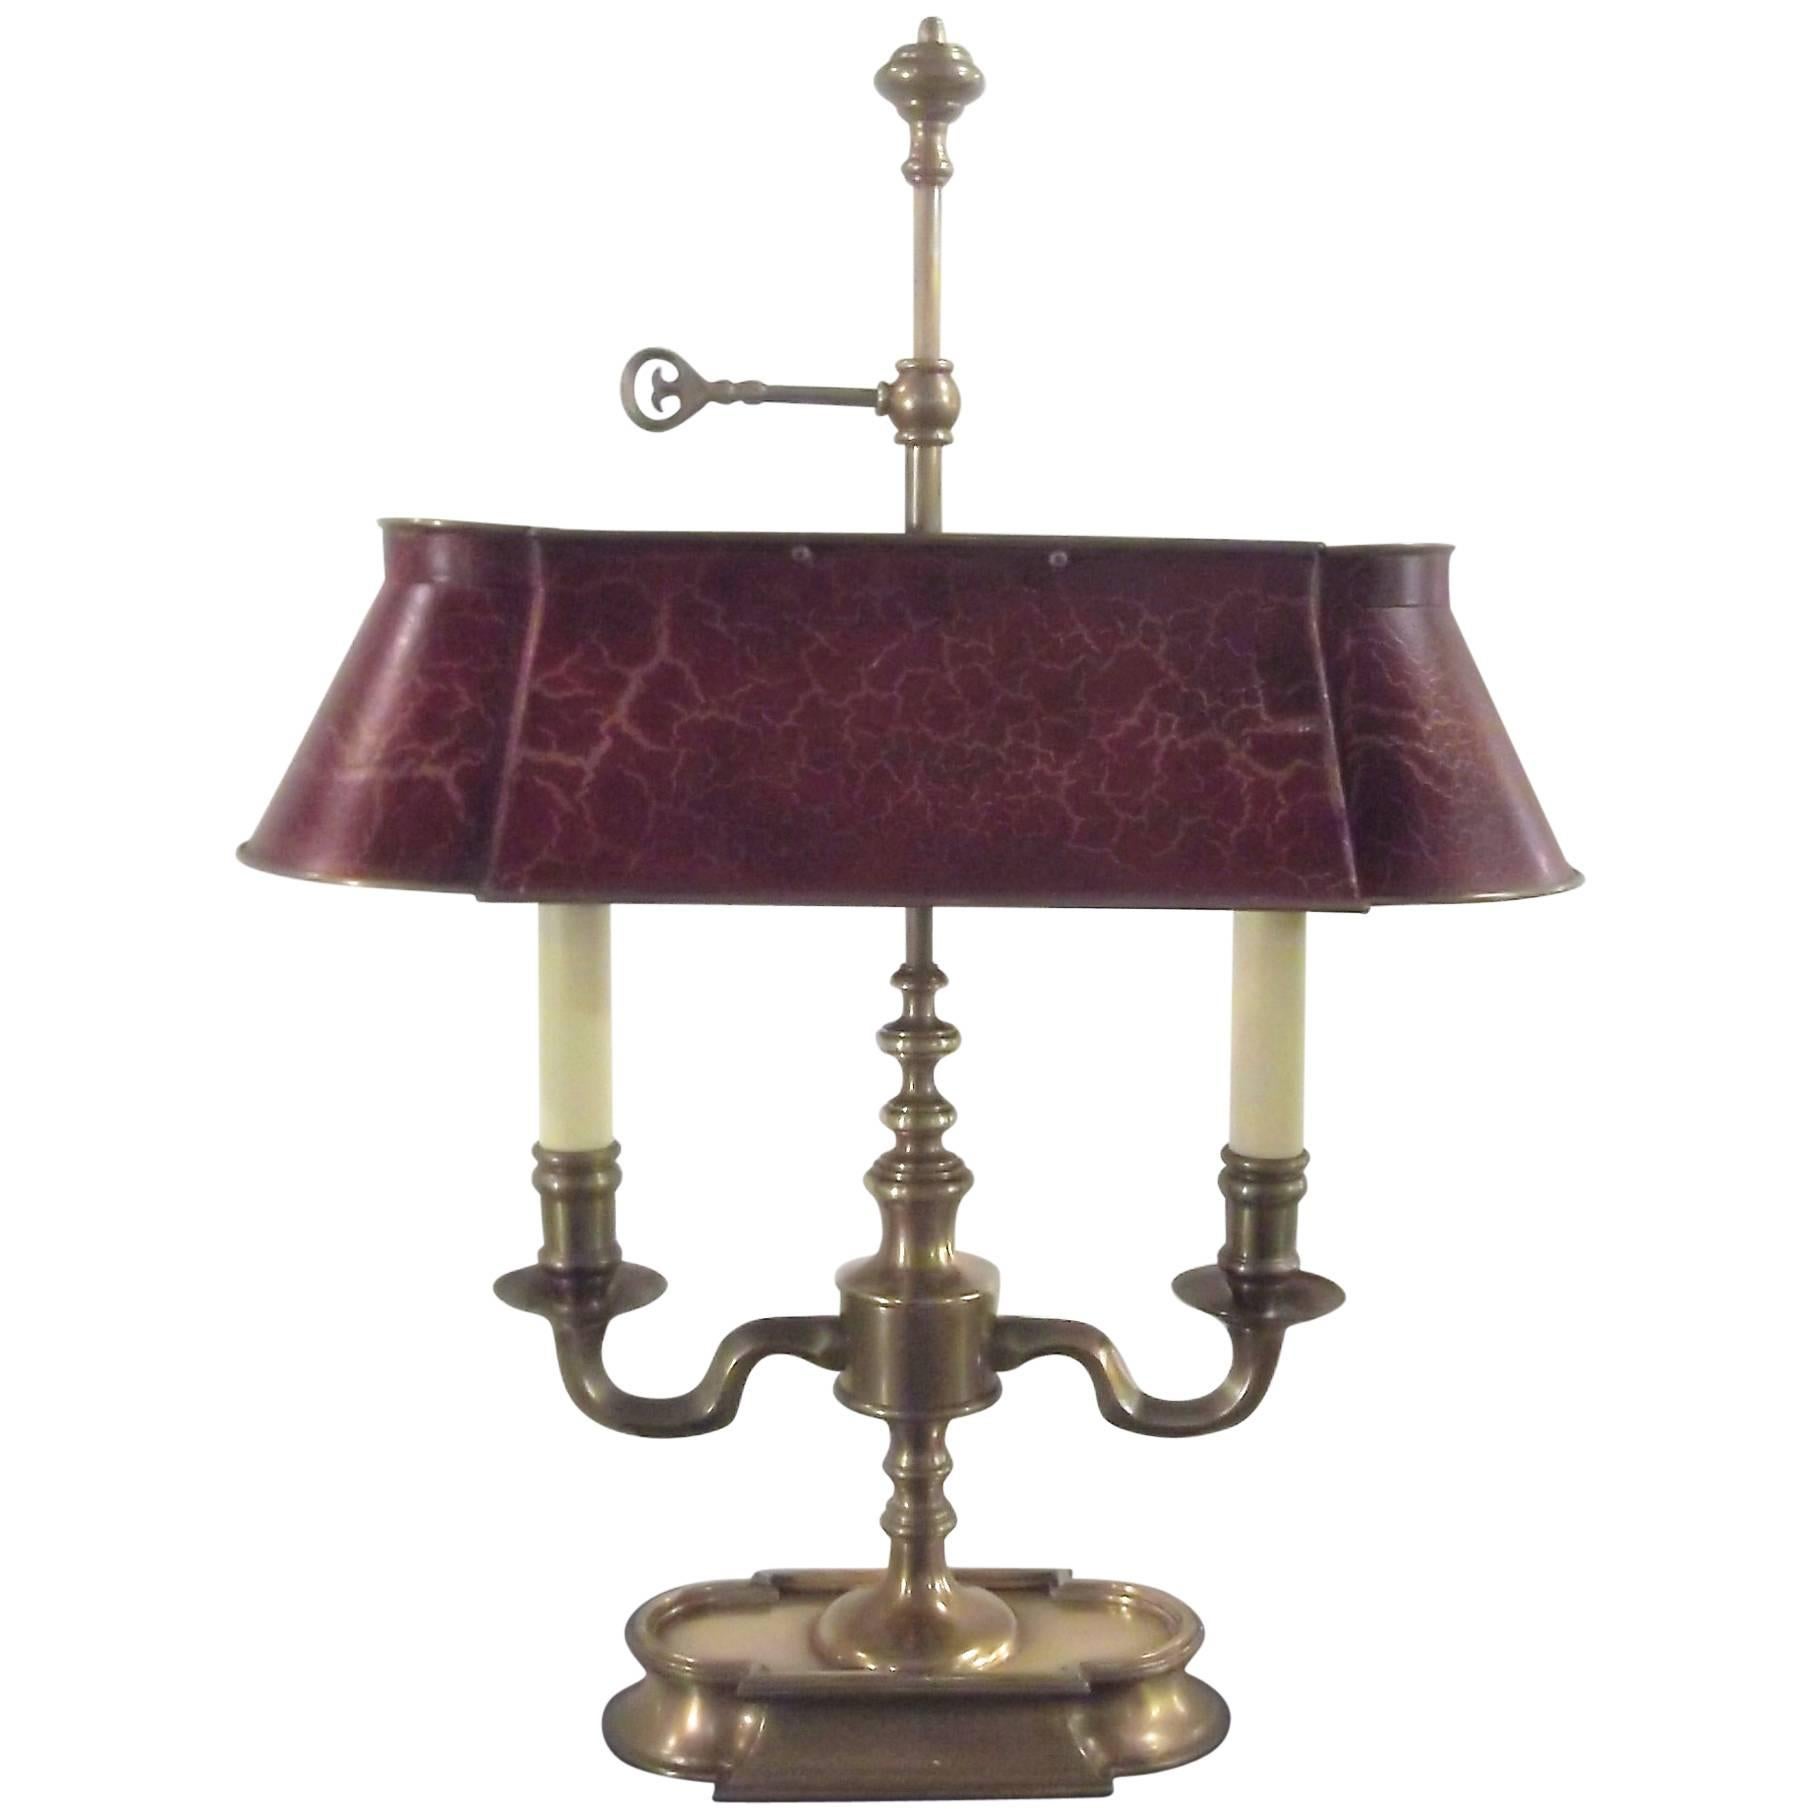 Cast Brass Library Bouillotte Lamp with Red Tole Shade